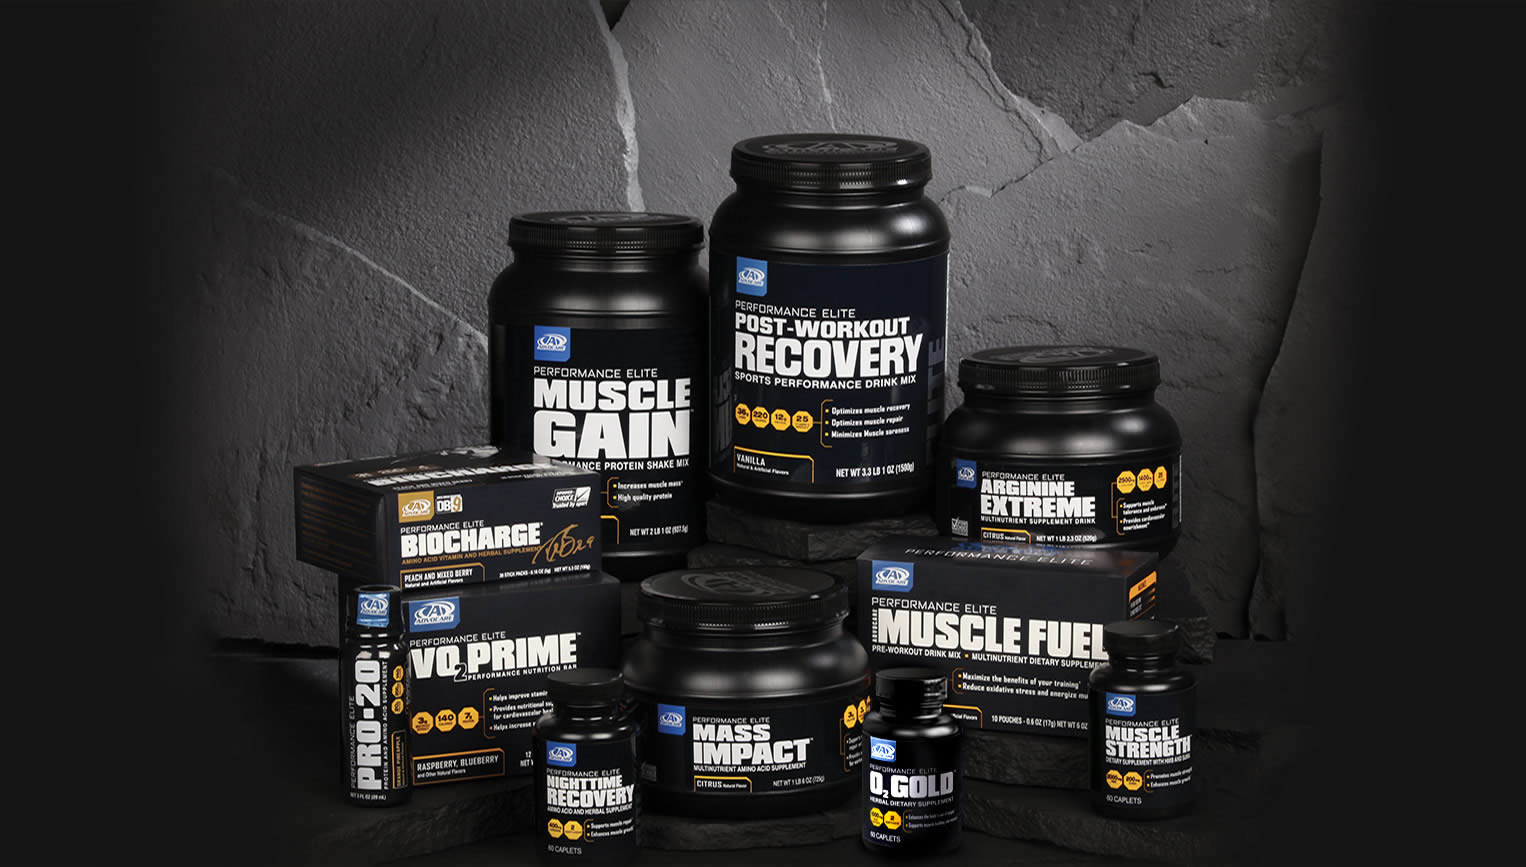 Product performance. Elite Performance. Performance products. Fuel the muscles что это. Product Fit.